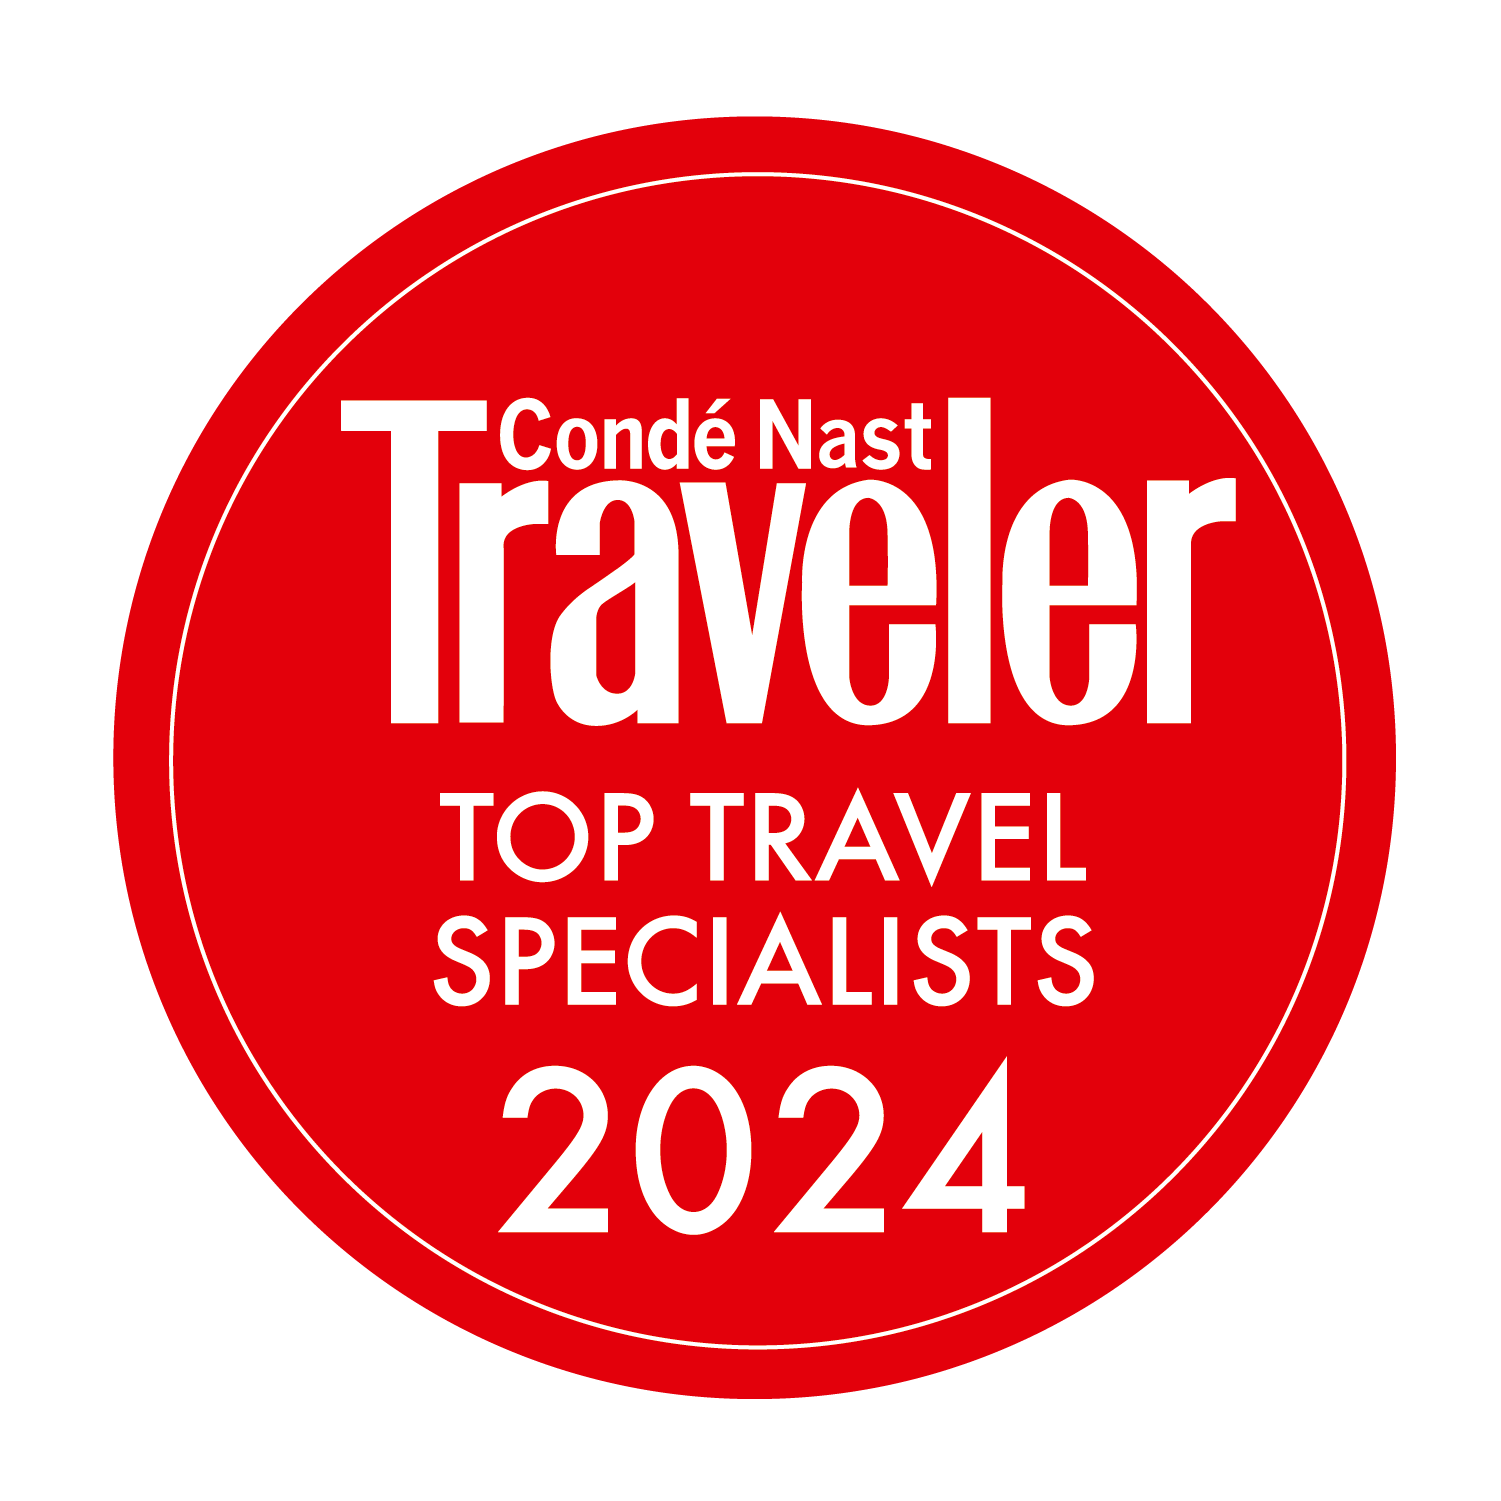 Red circular badge logo of Condé Nast Traveler for Top Travel Specialists Awards 2024, with white and red text on a green background.